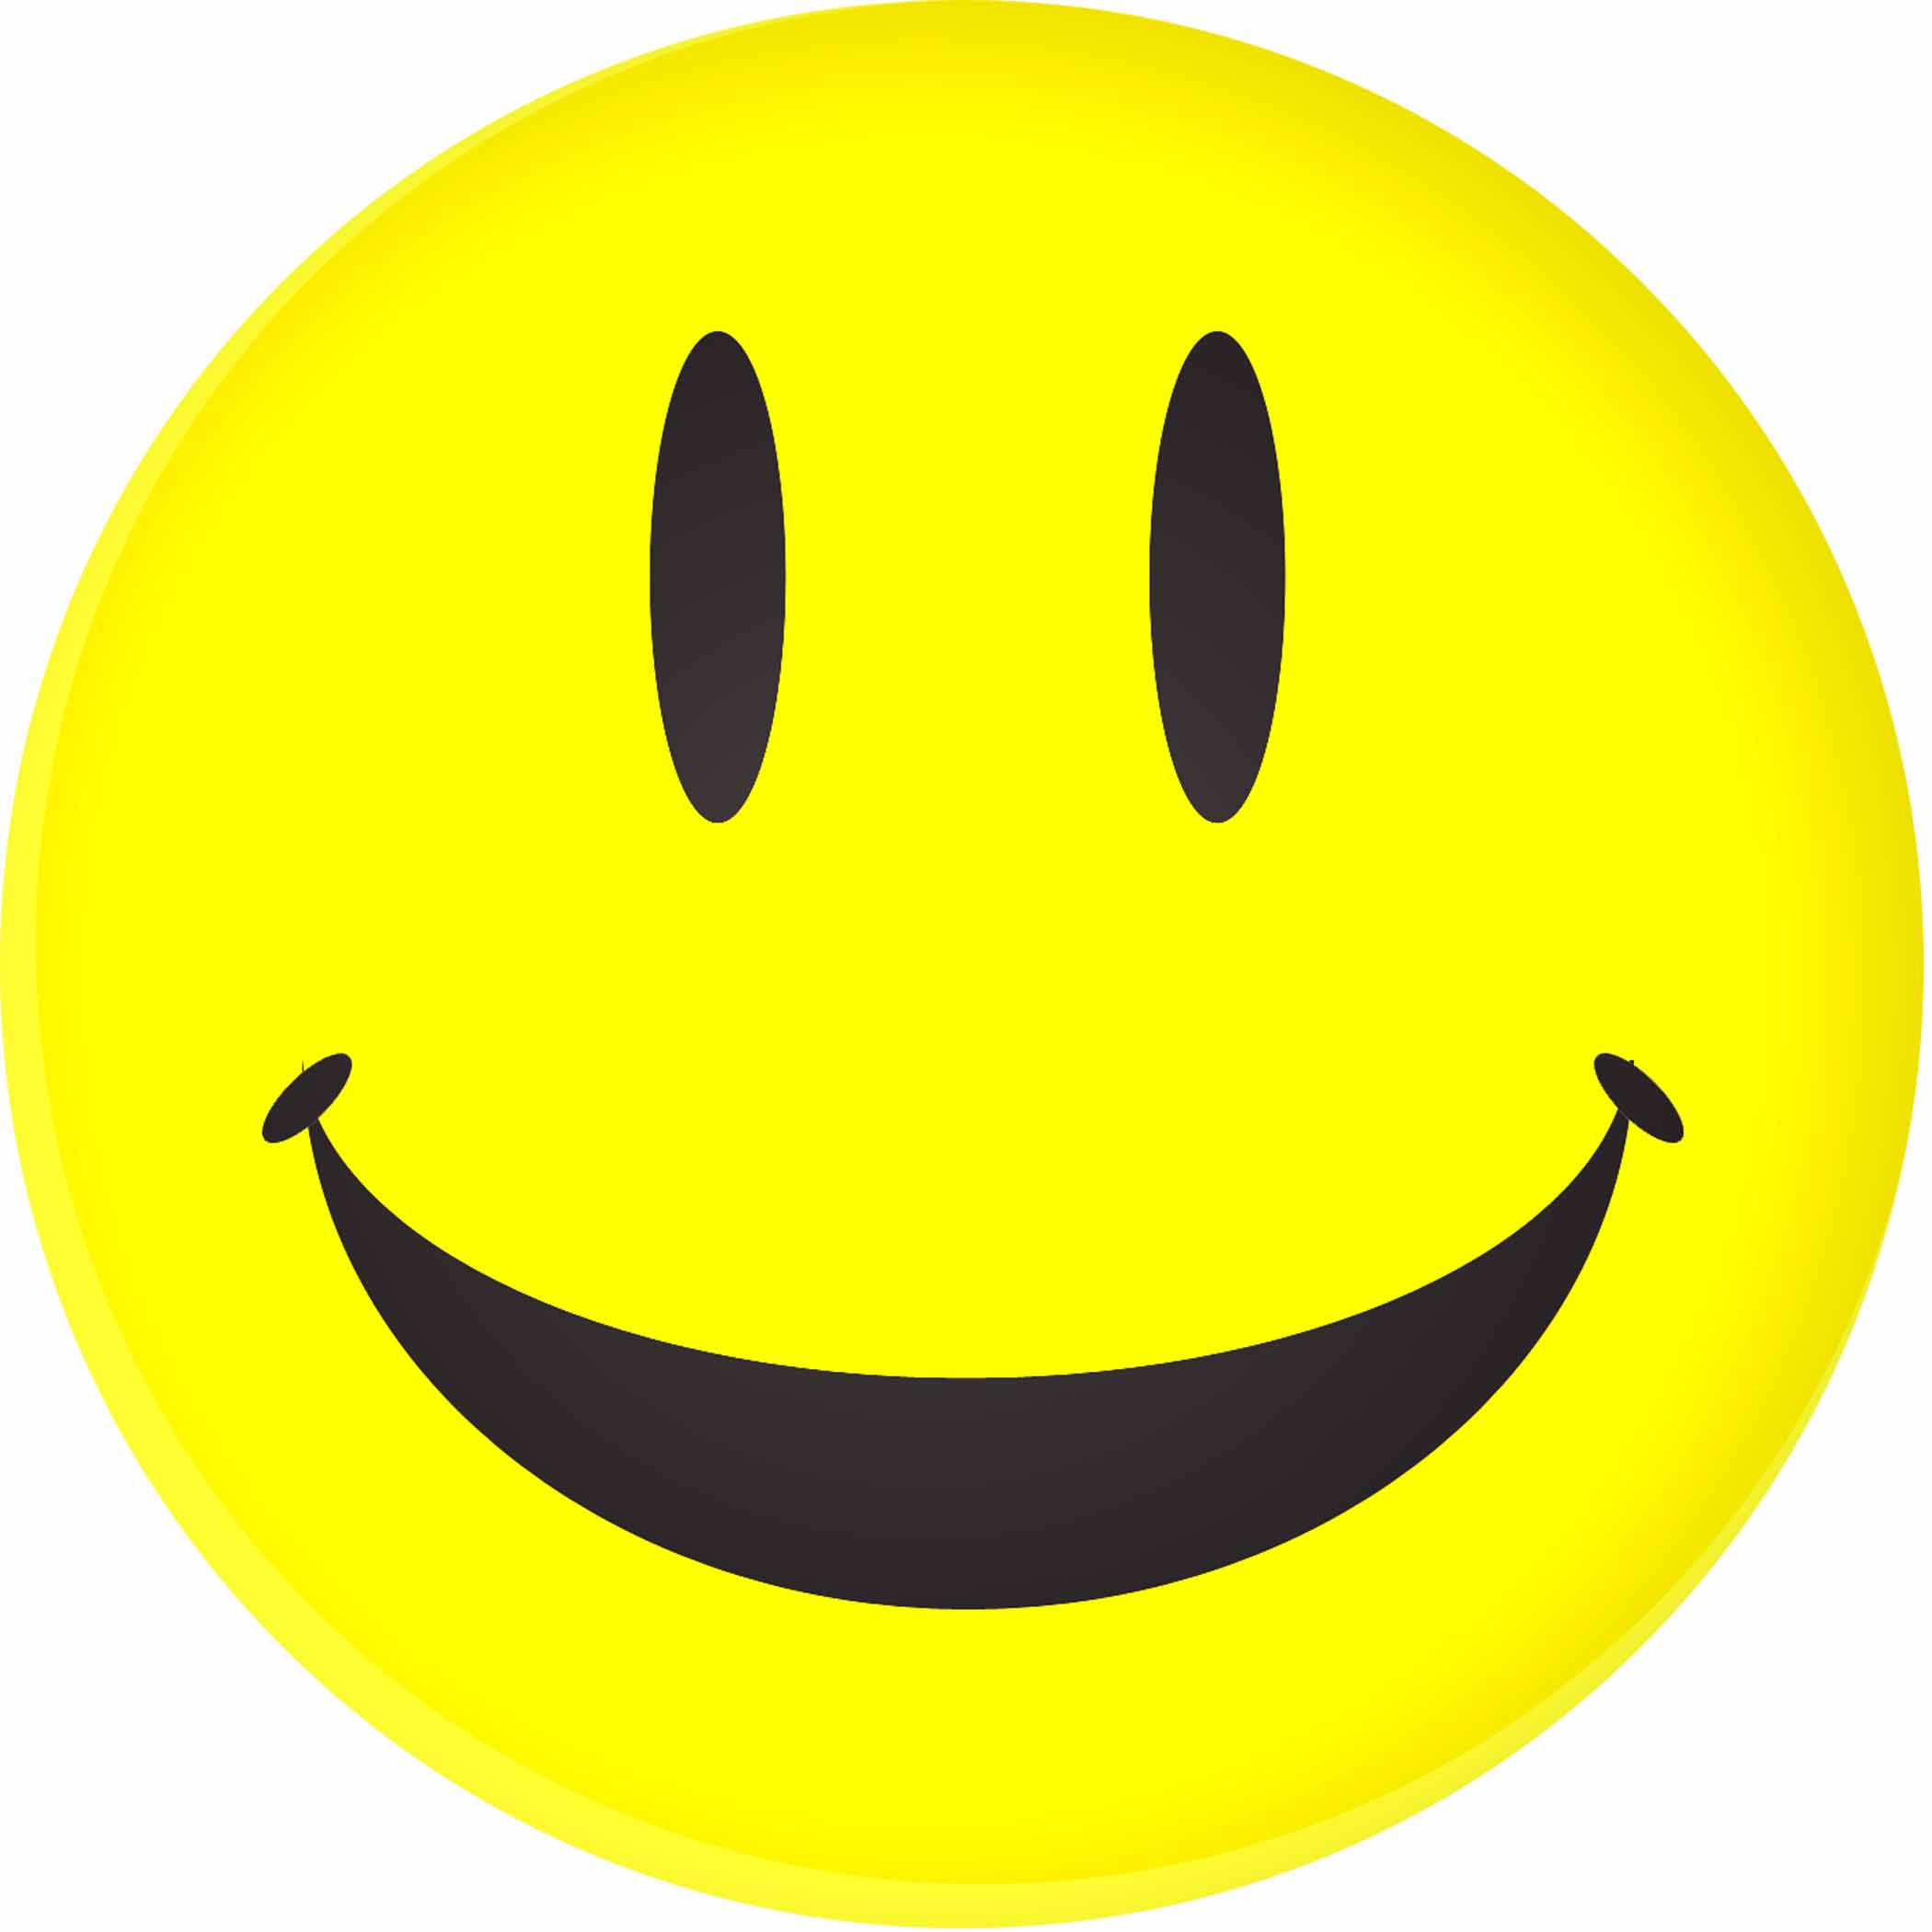 11 Pictures Smiling Faces Free Cliparts That You Can Download To You